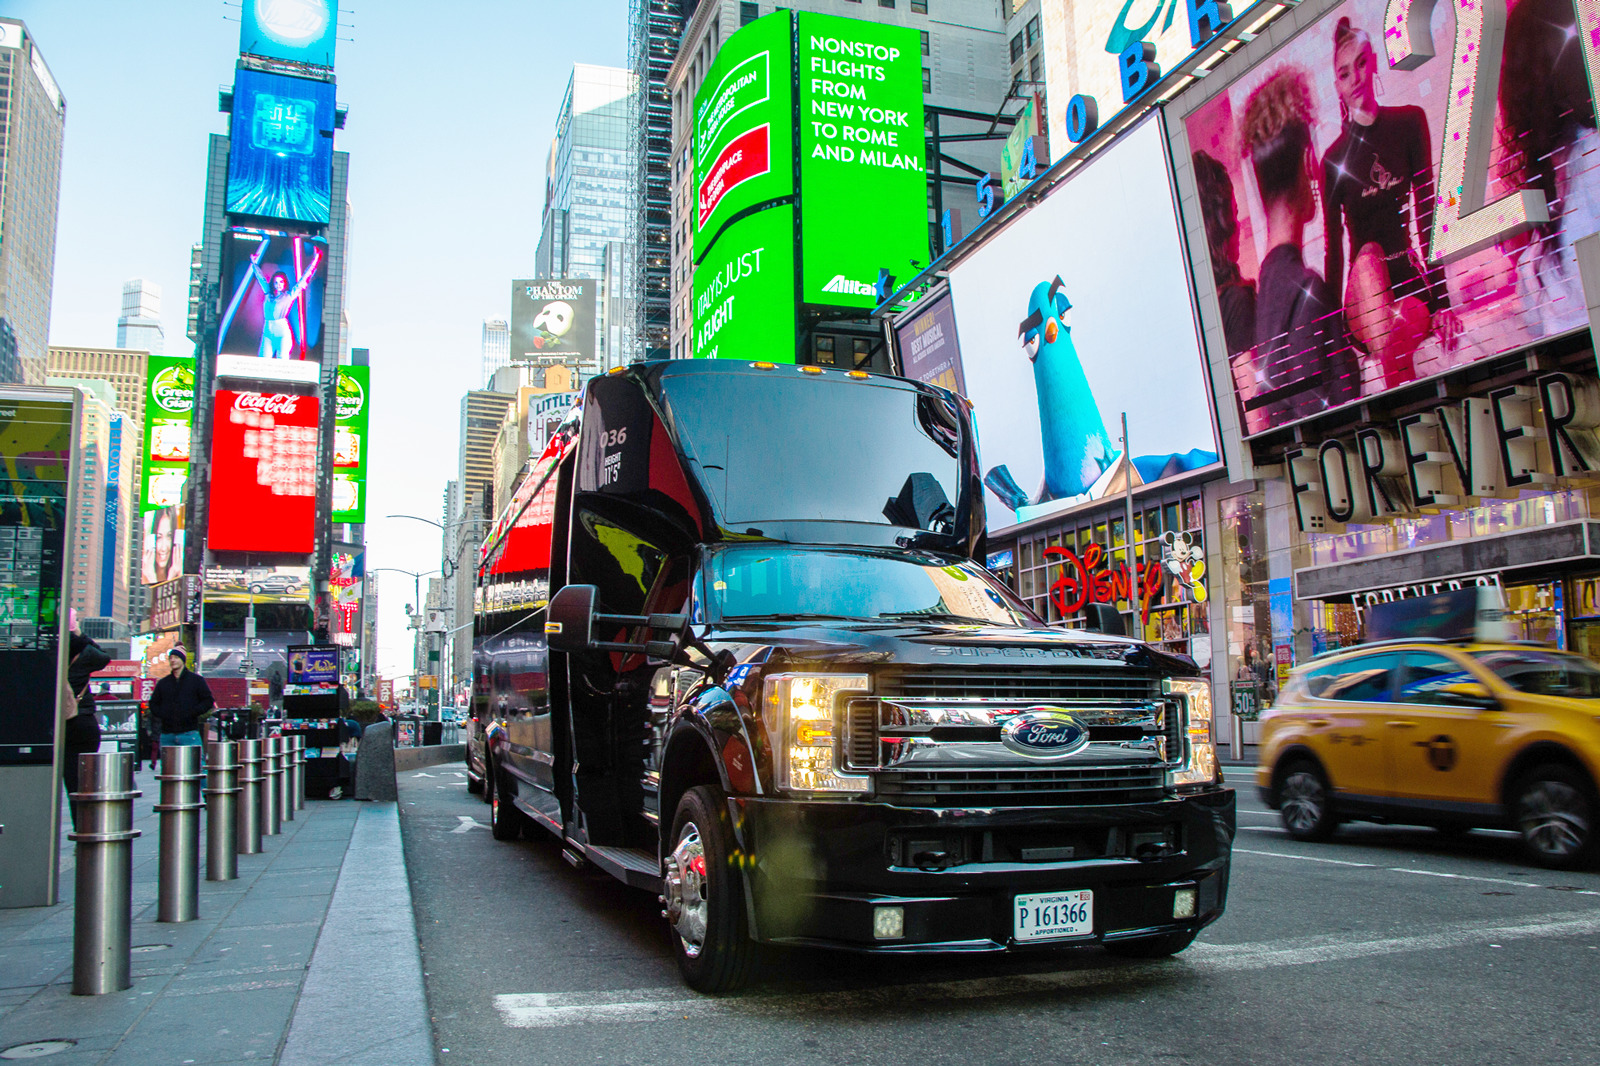 NYC Bus Tours by USA Guided Tours